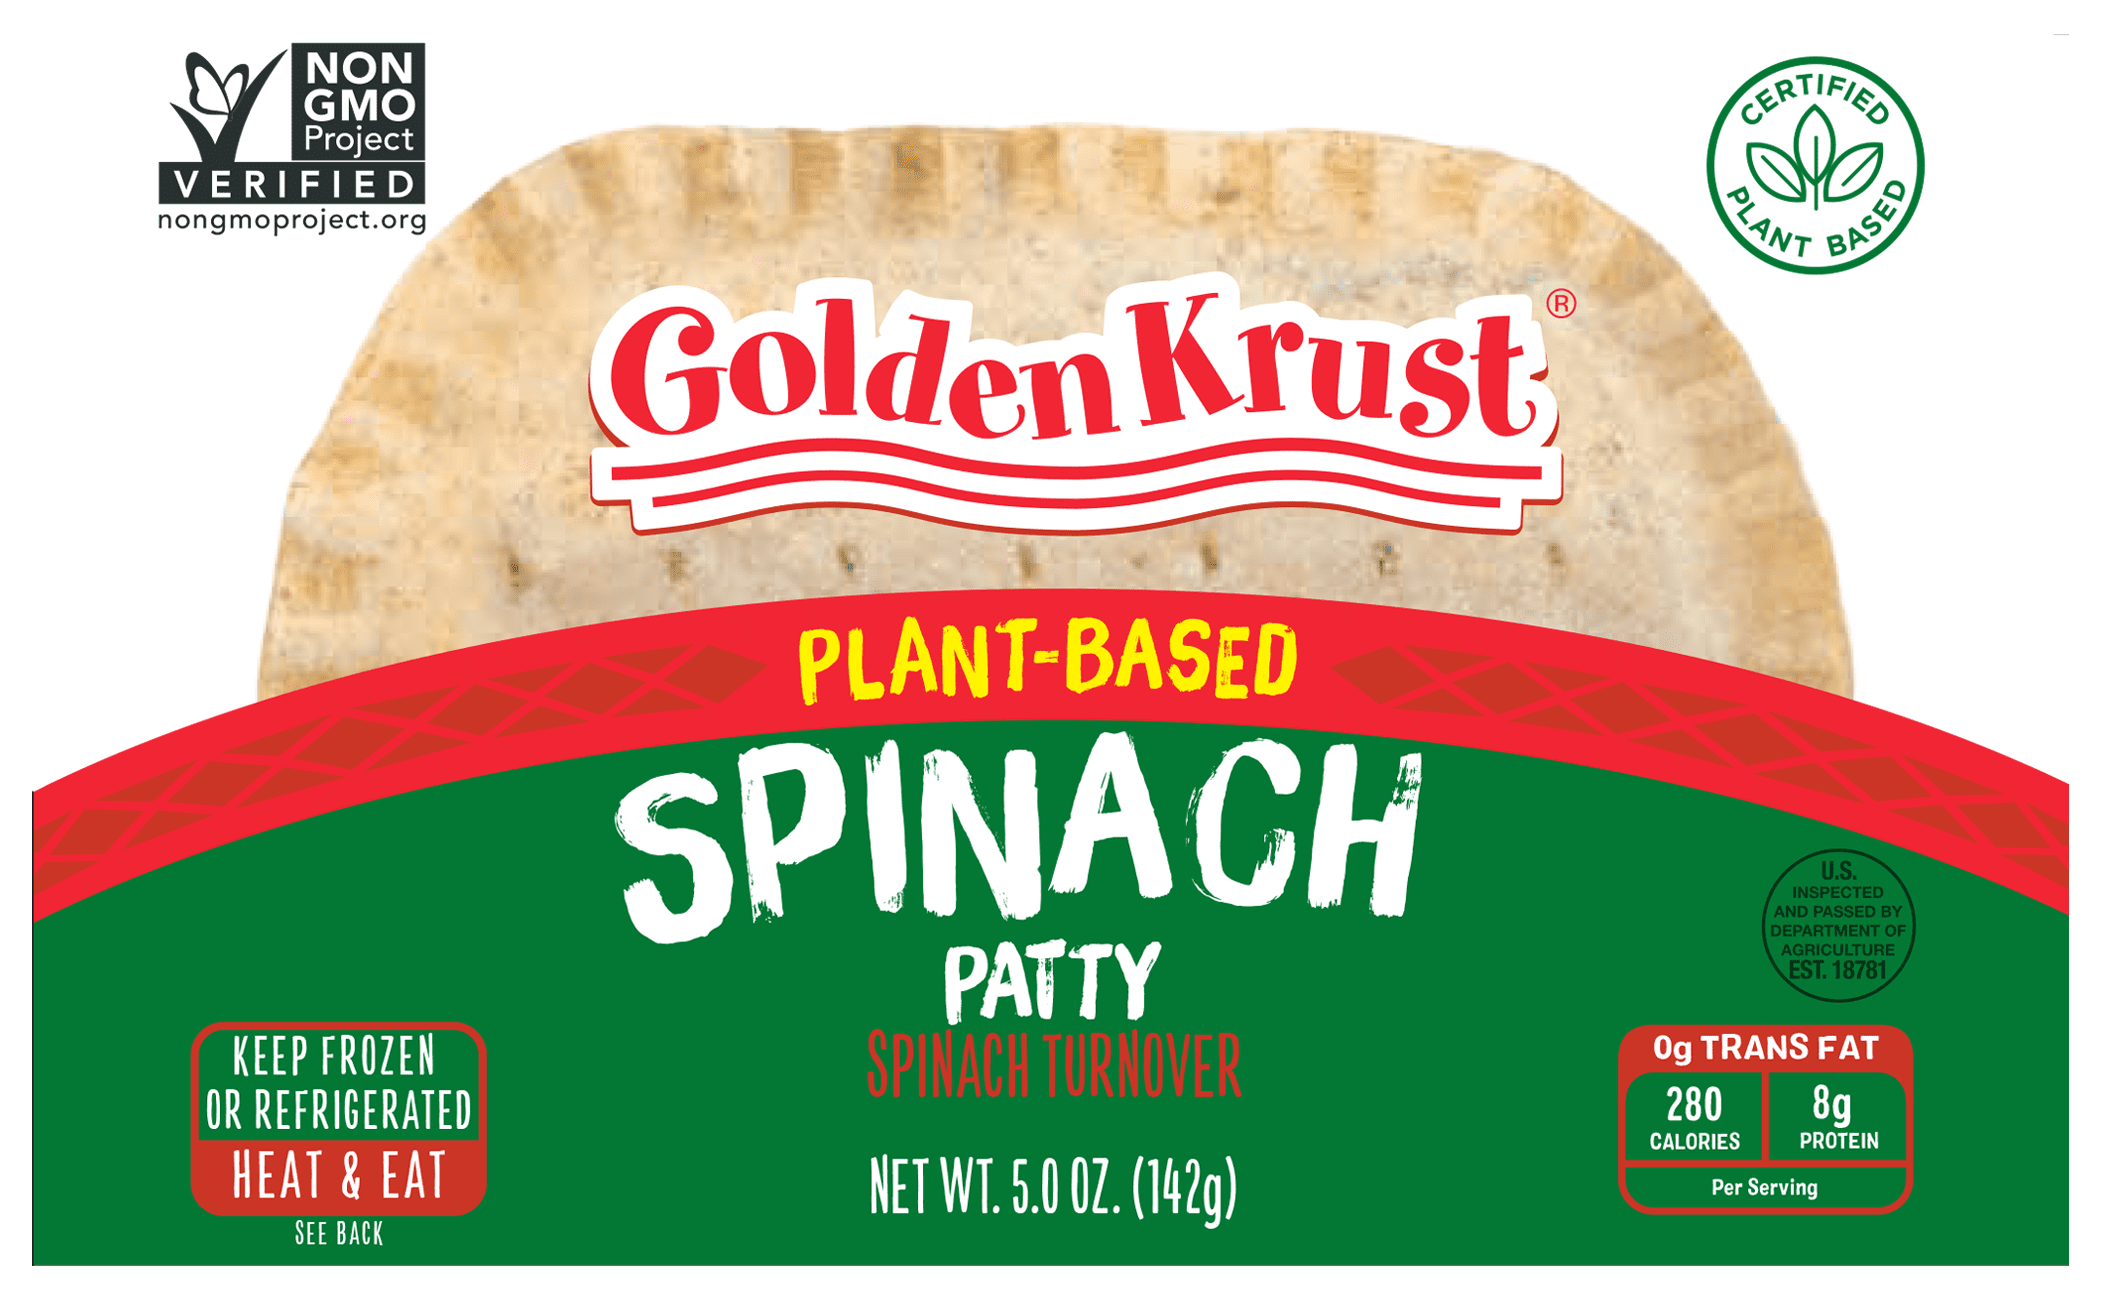 GK Spinach Patty Product